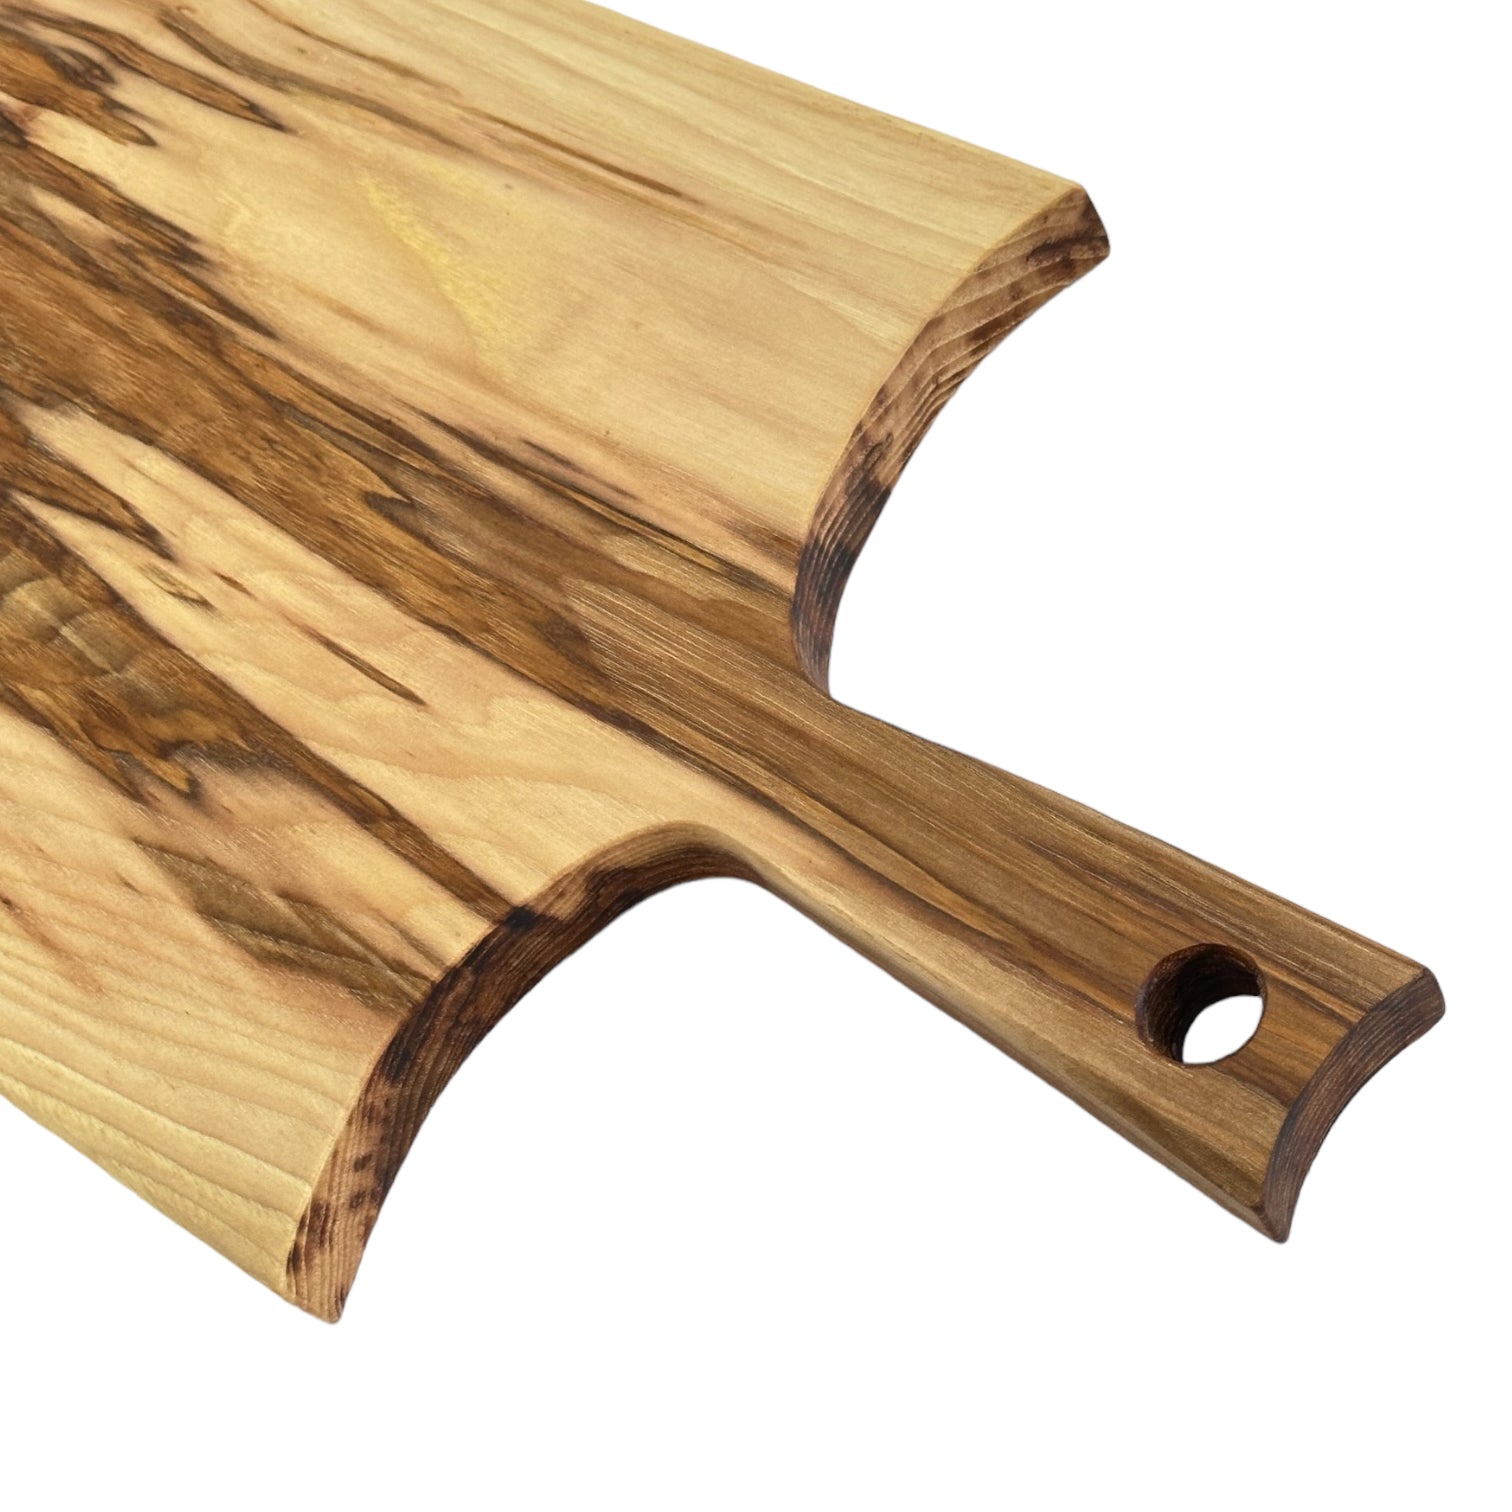 Rustic Handmade Wooden Charcuterie Boards - RTS hickory handle detail view